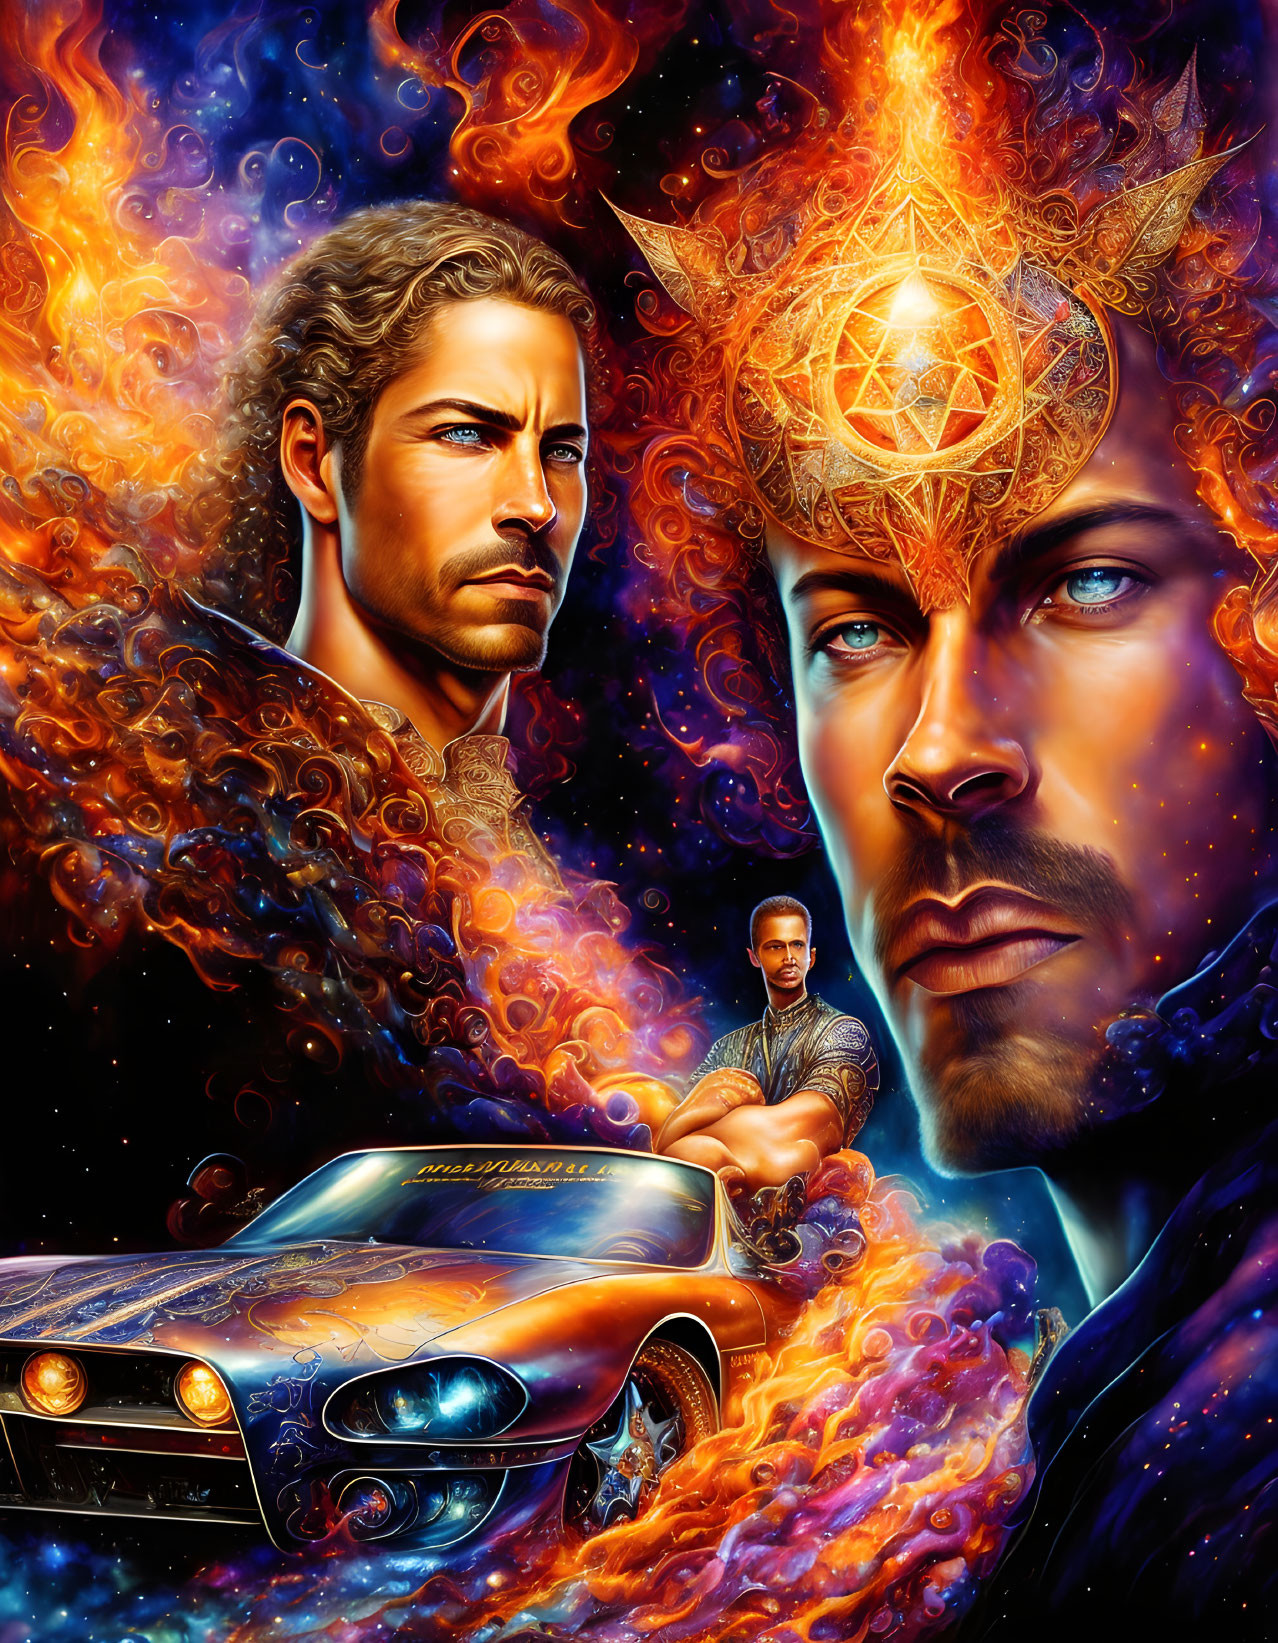 Men with muscle car in cosmic backdrop with compass emblem.